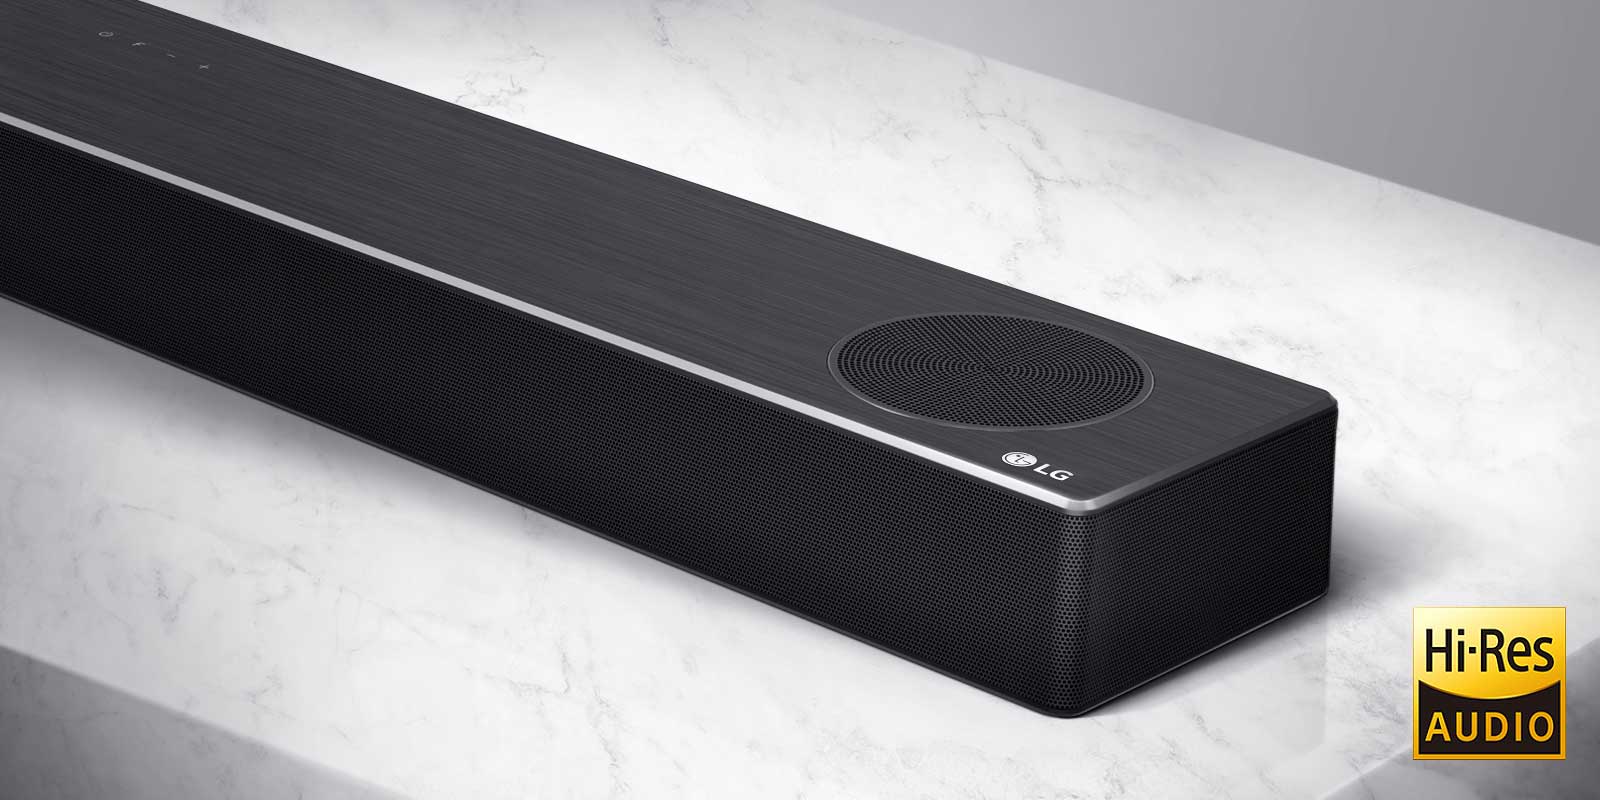 Close-up of LG Soundbar right side with LG logo on the bottom right corner of a product.